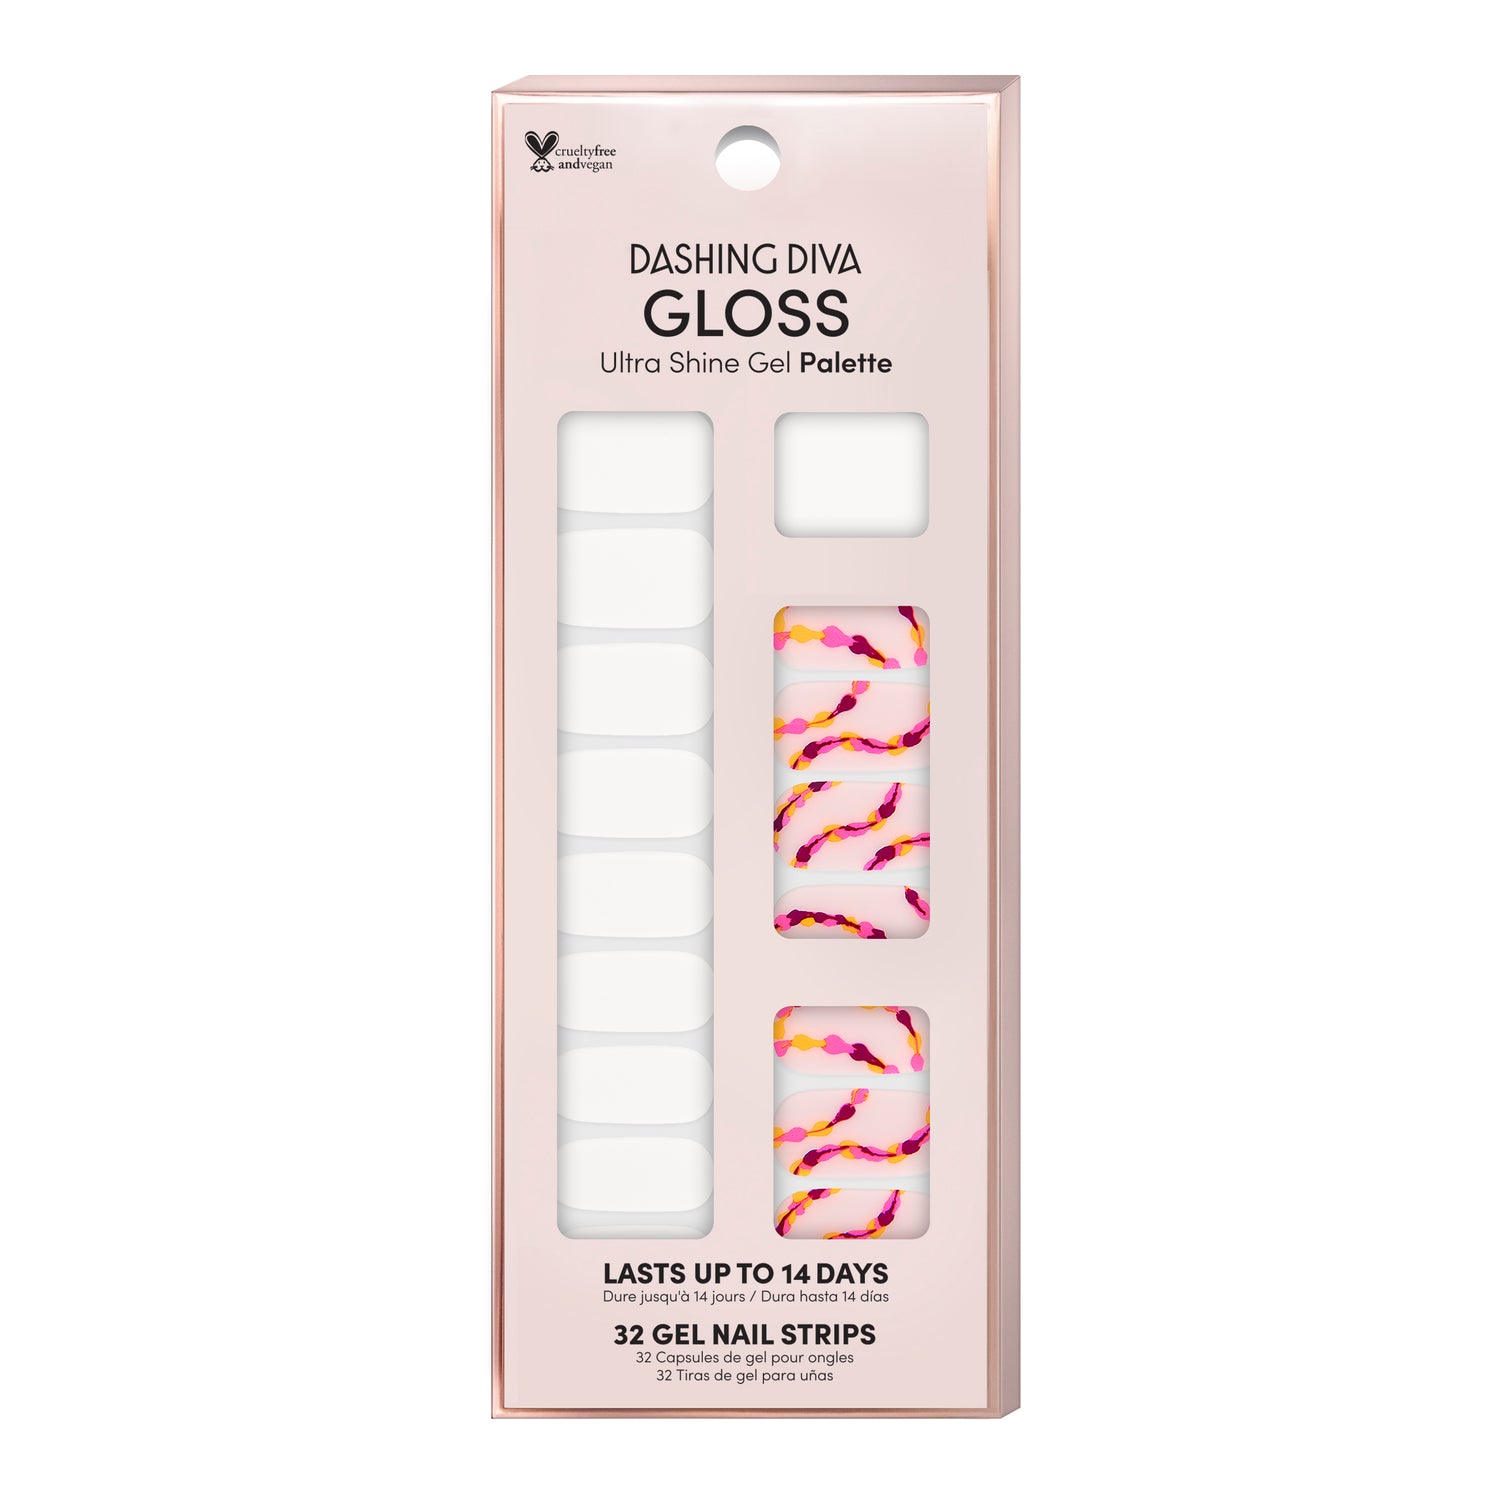 Sheer pink & sheer white nail strips featuring paint inspired line art with a high shine, glossy finish.